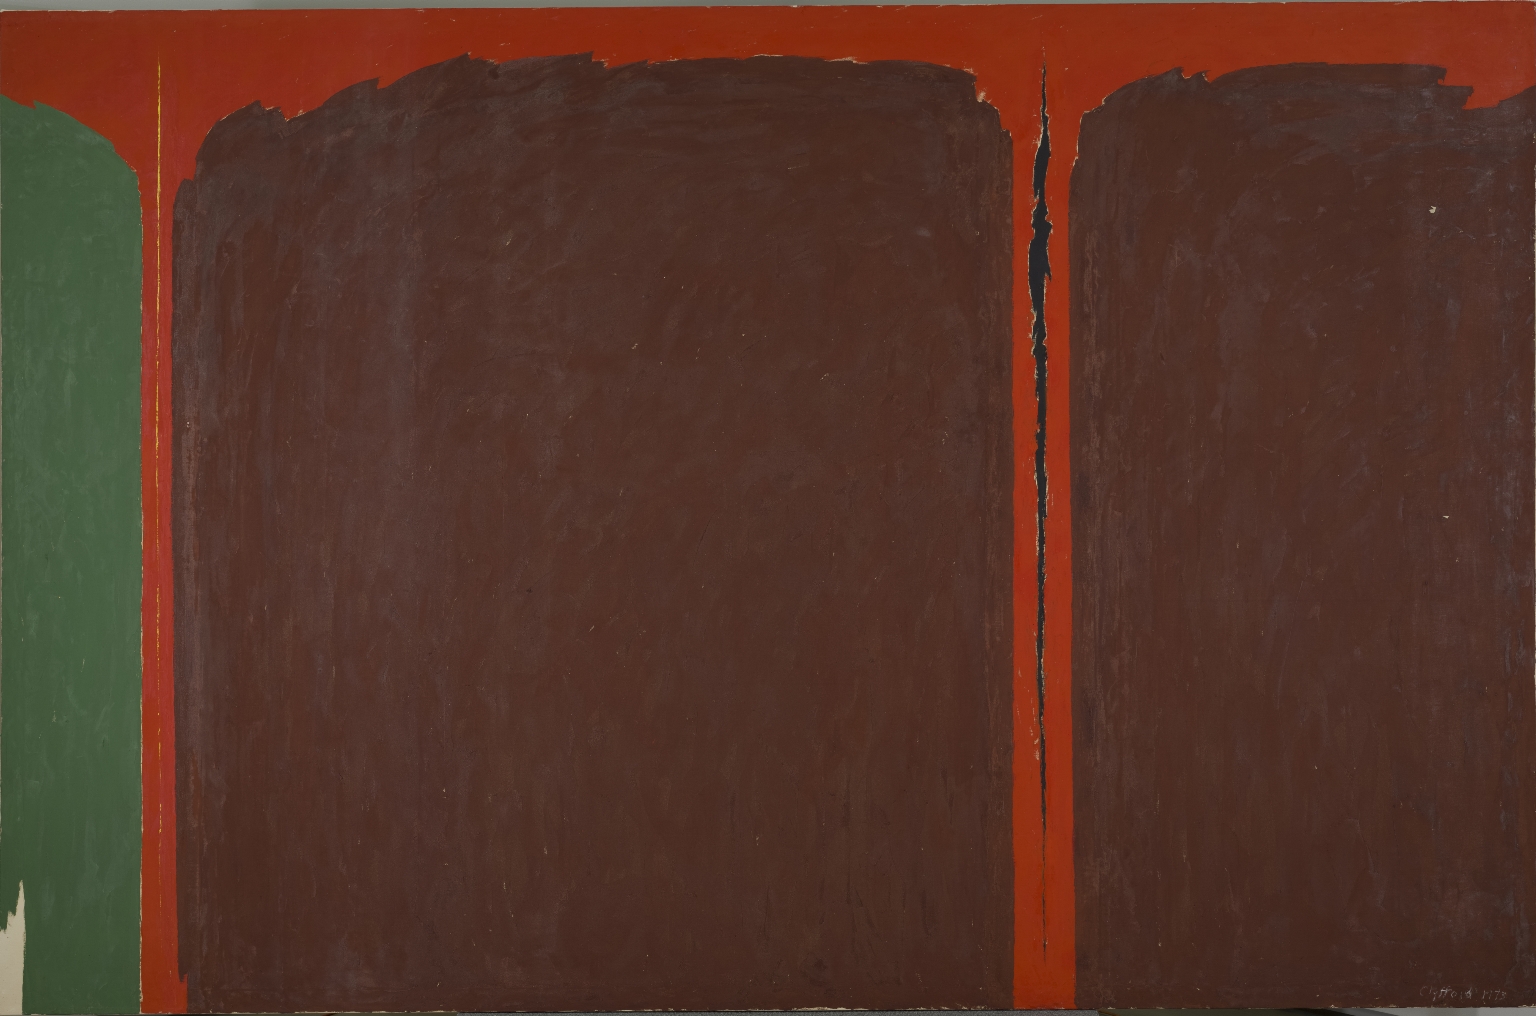 Abstract painting with two large areas of reddish brown, an area of green, and a rusty red separating the areas and along the top